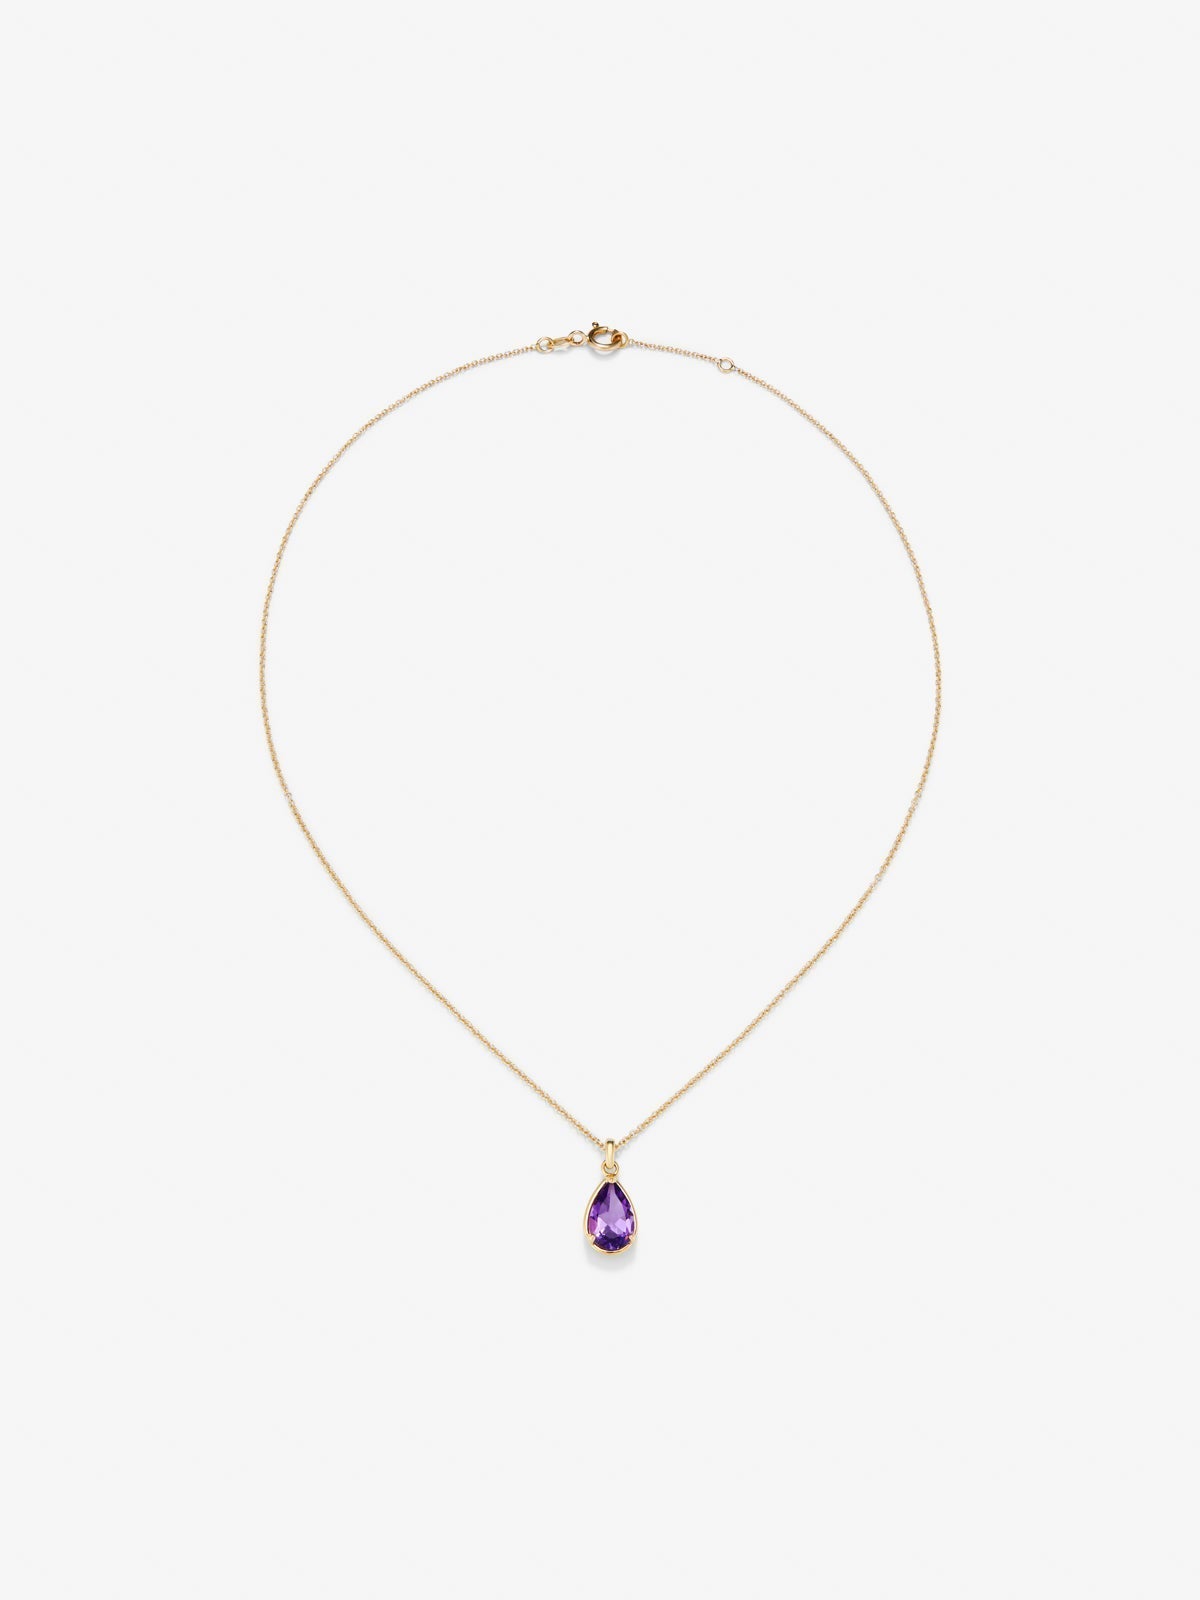 18K yellow gold pendant chain with amethyst